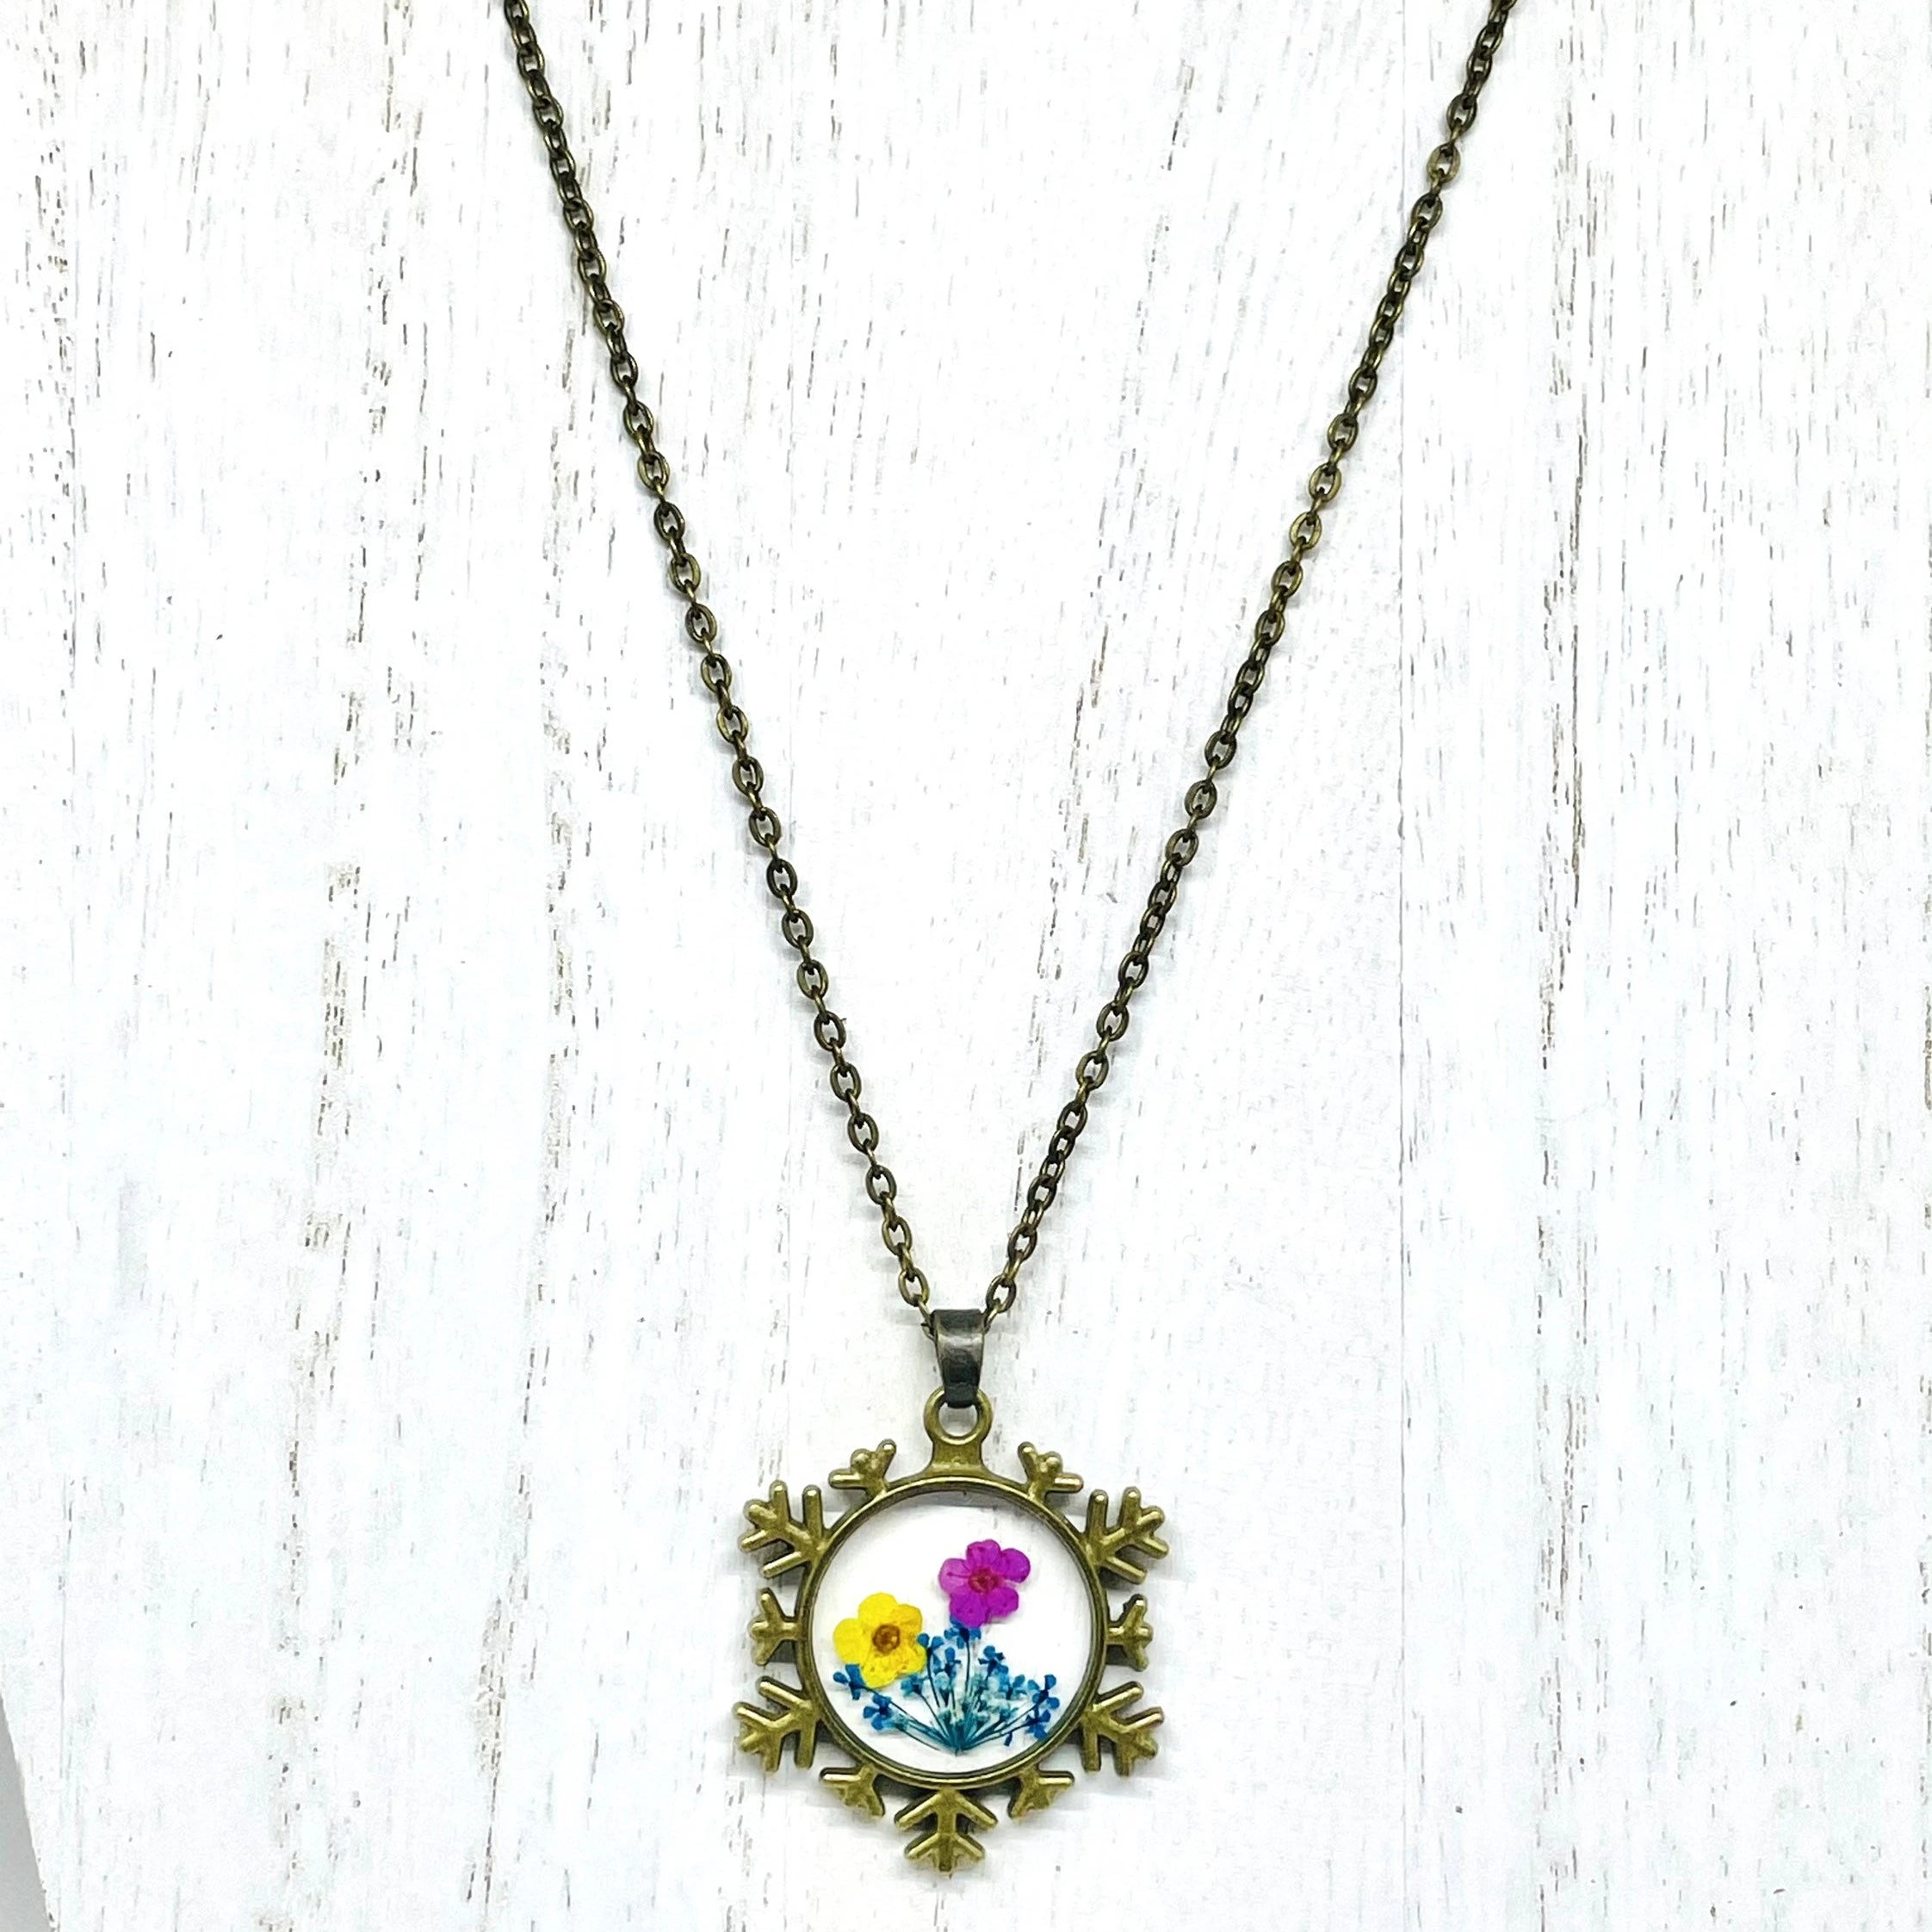 Pressed Flower in Snowflake Pendant Necklace